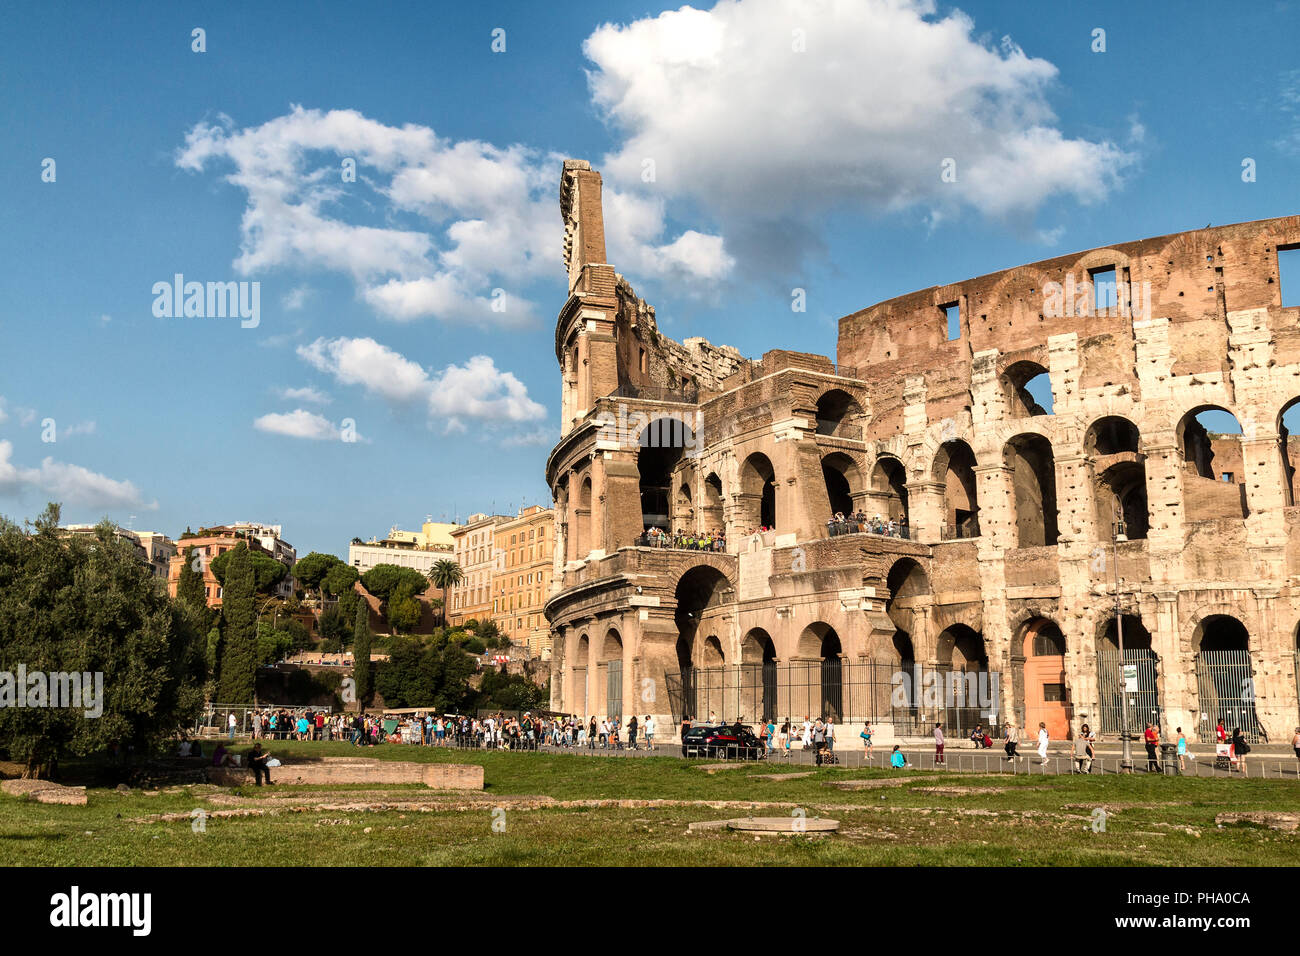 Rome, Italy - October 11, 2014: Part of the Flavian Amphitheatre known as the Coliseum. it is one of the main tourist attractions of the city of Rome  Stock Photo